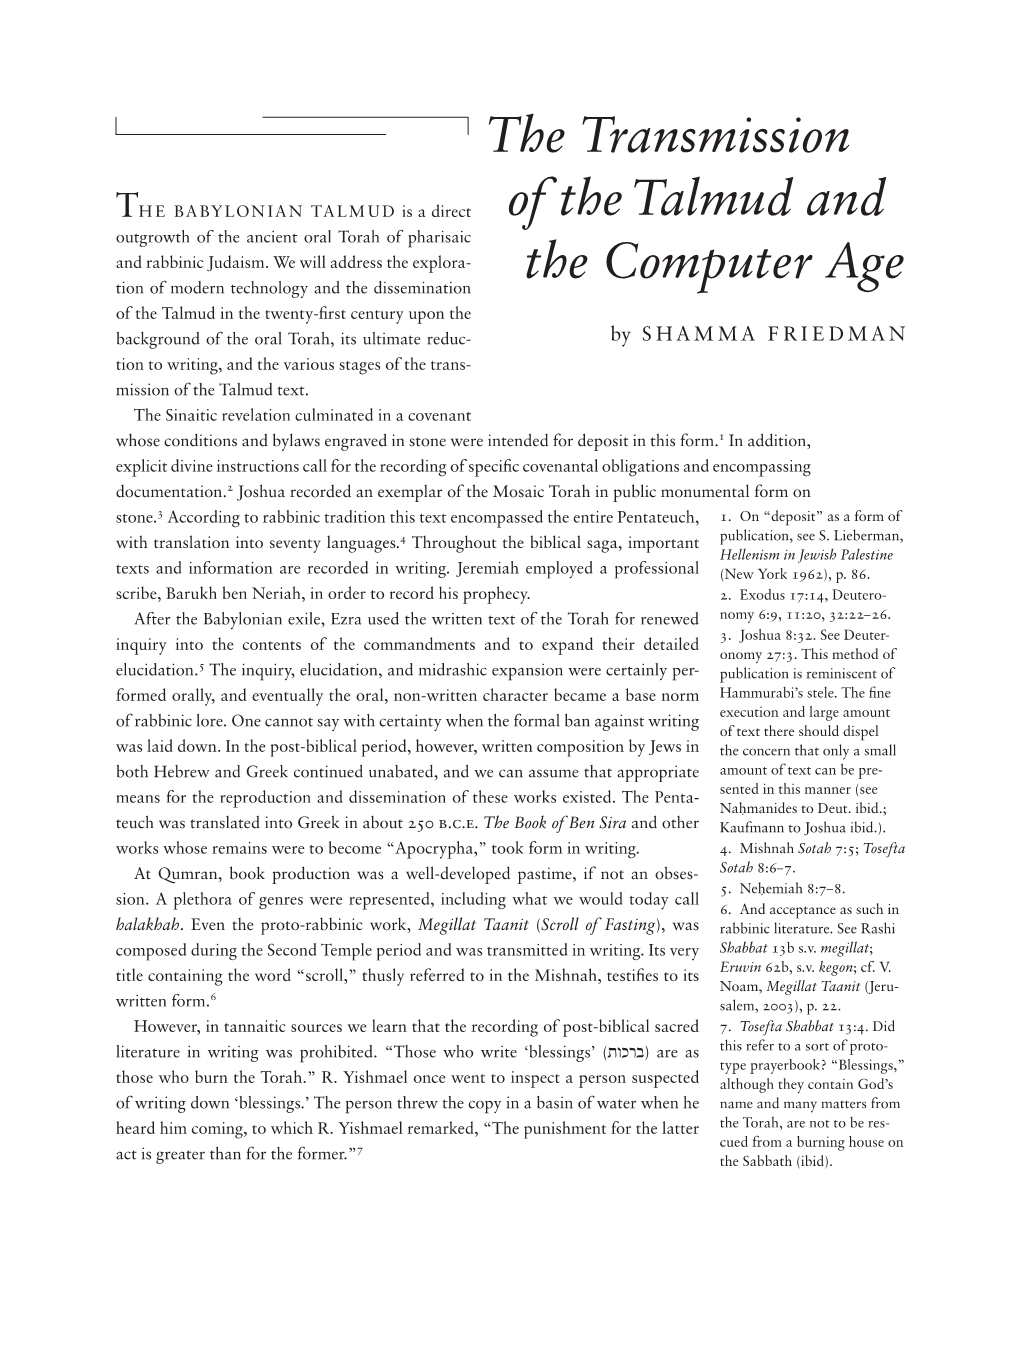 The Transmission of the Talmud and the Computer Age 145